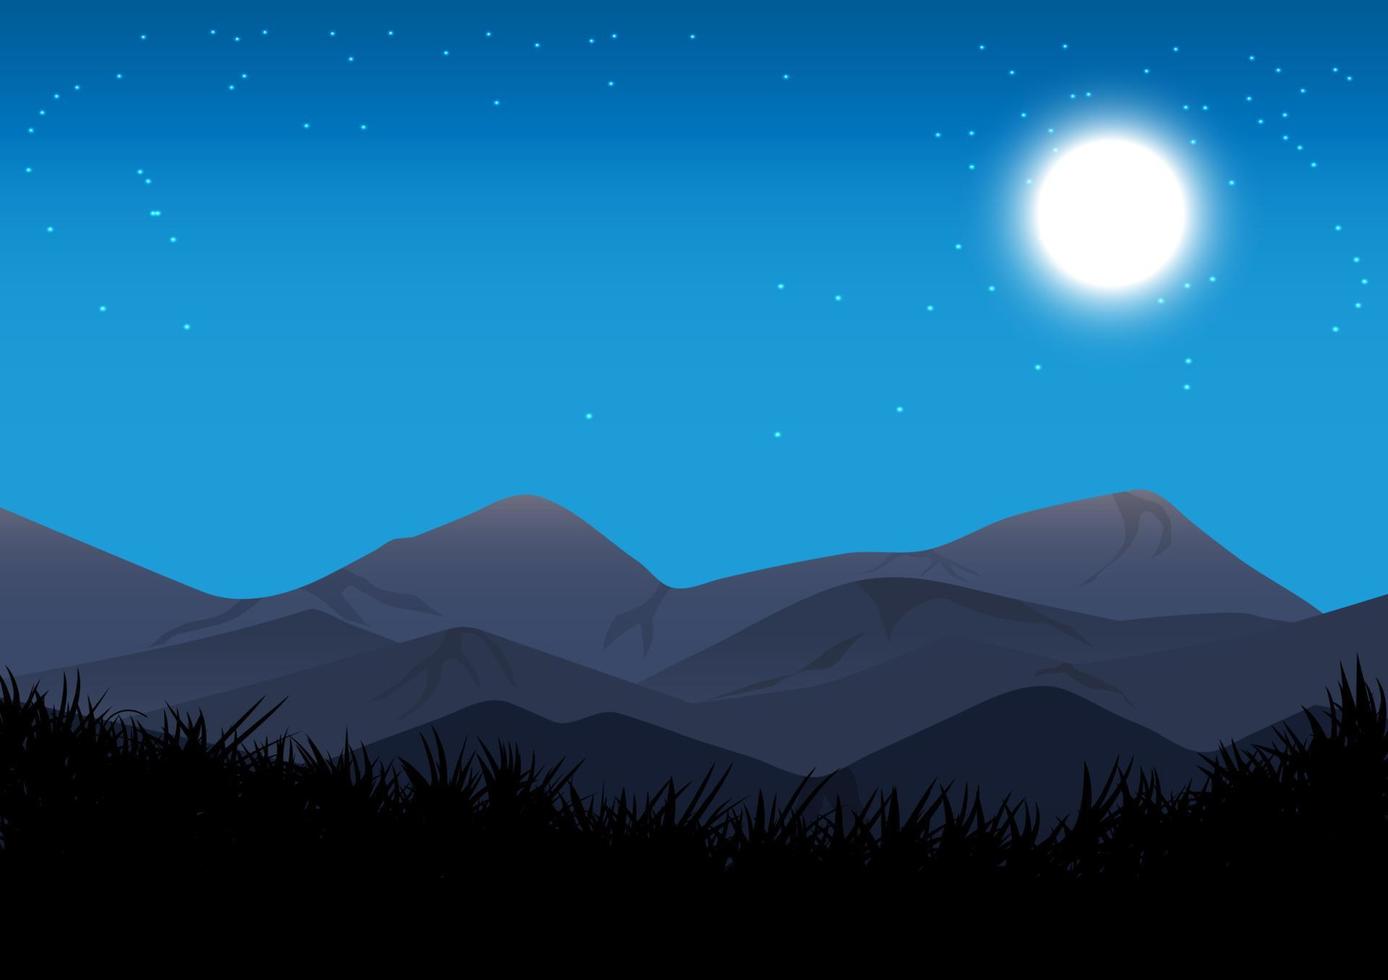 landscape view mountain and Moon on the sky at night time graphics design vector illustration